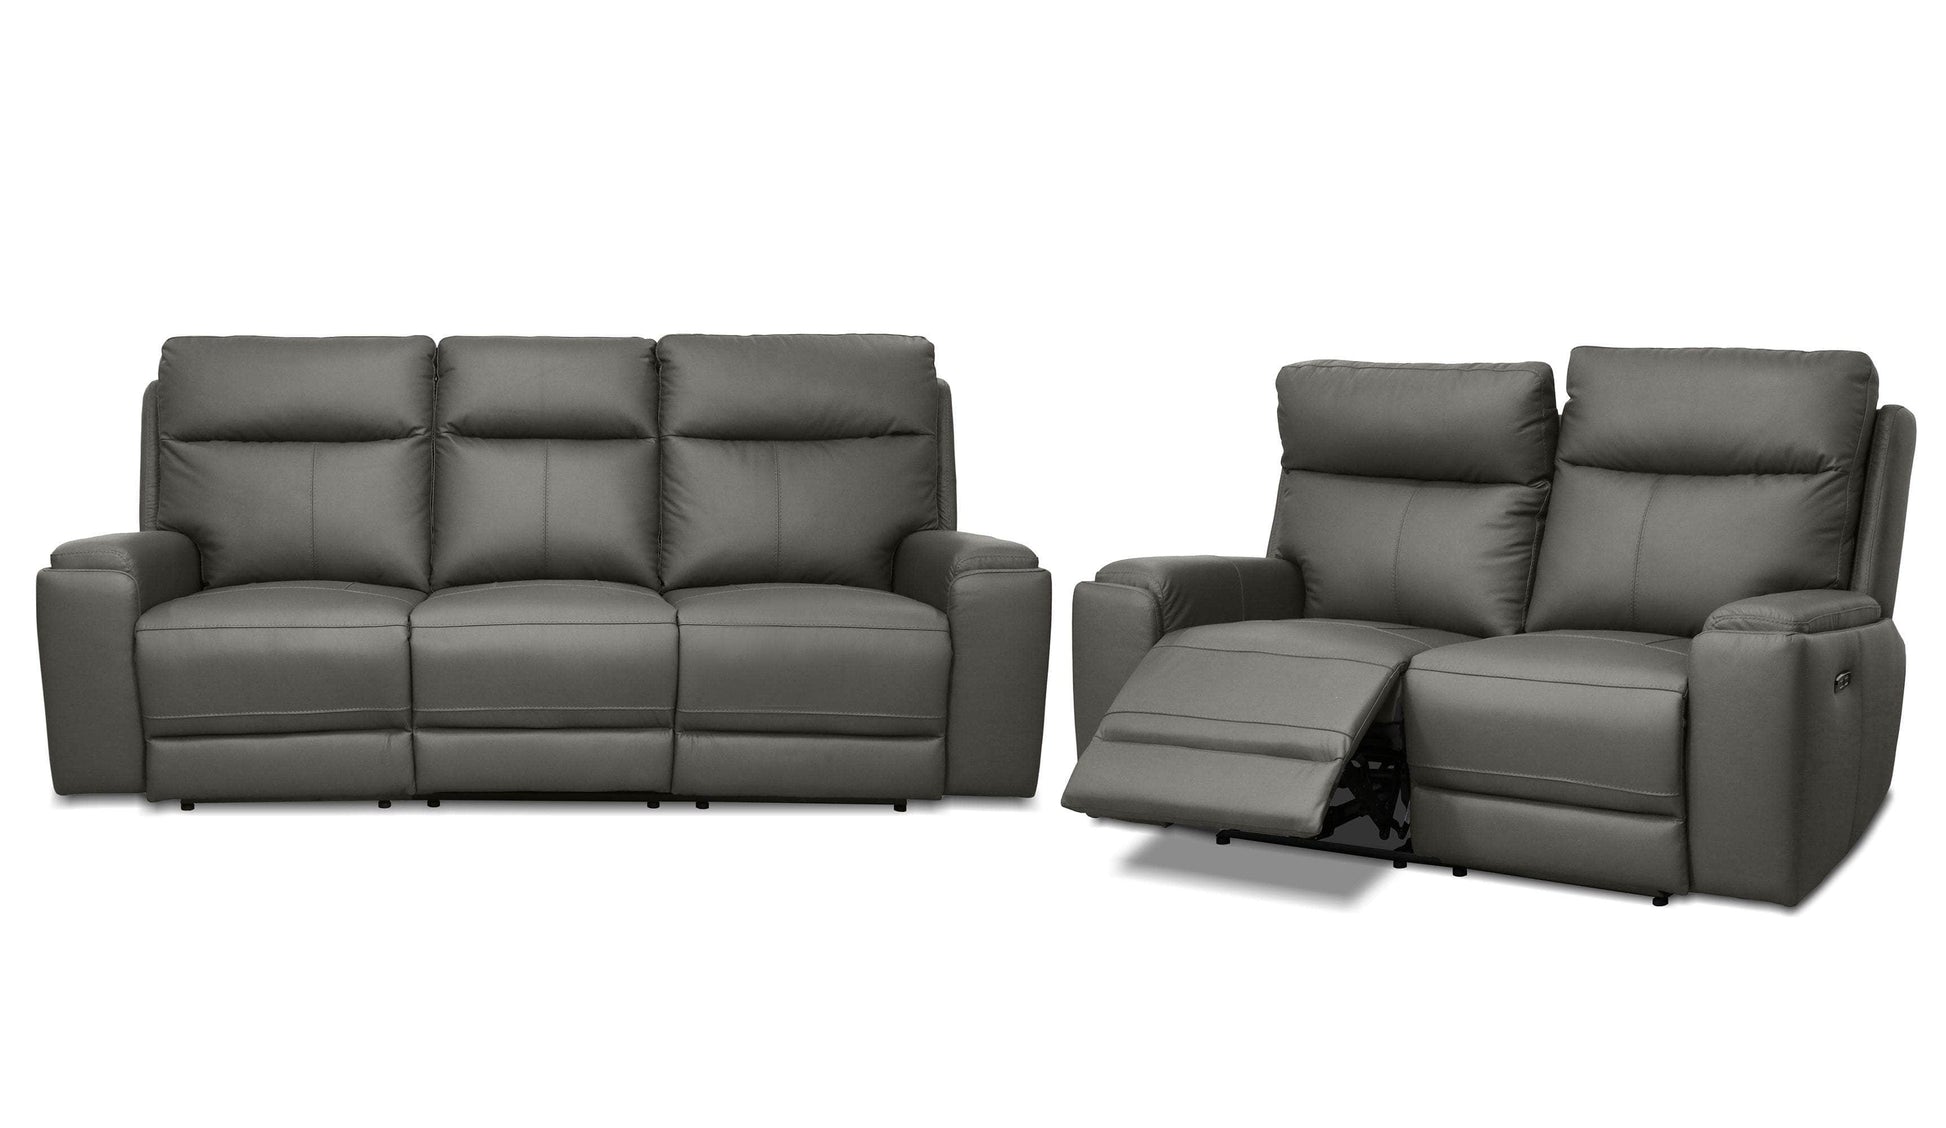 Pending - Levoluxe Ryder Charcoal Arlo 2 Piece Power Reclining Sofa and Loveseat Set with Power Headrests in Leather Match - Available in 2 Colours